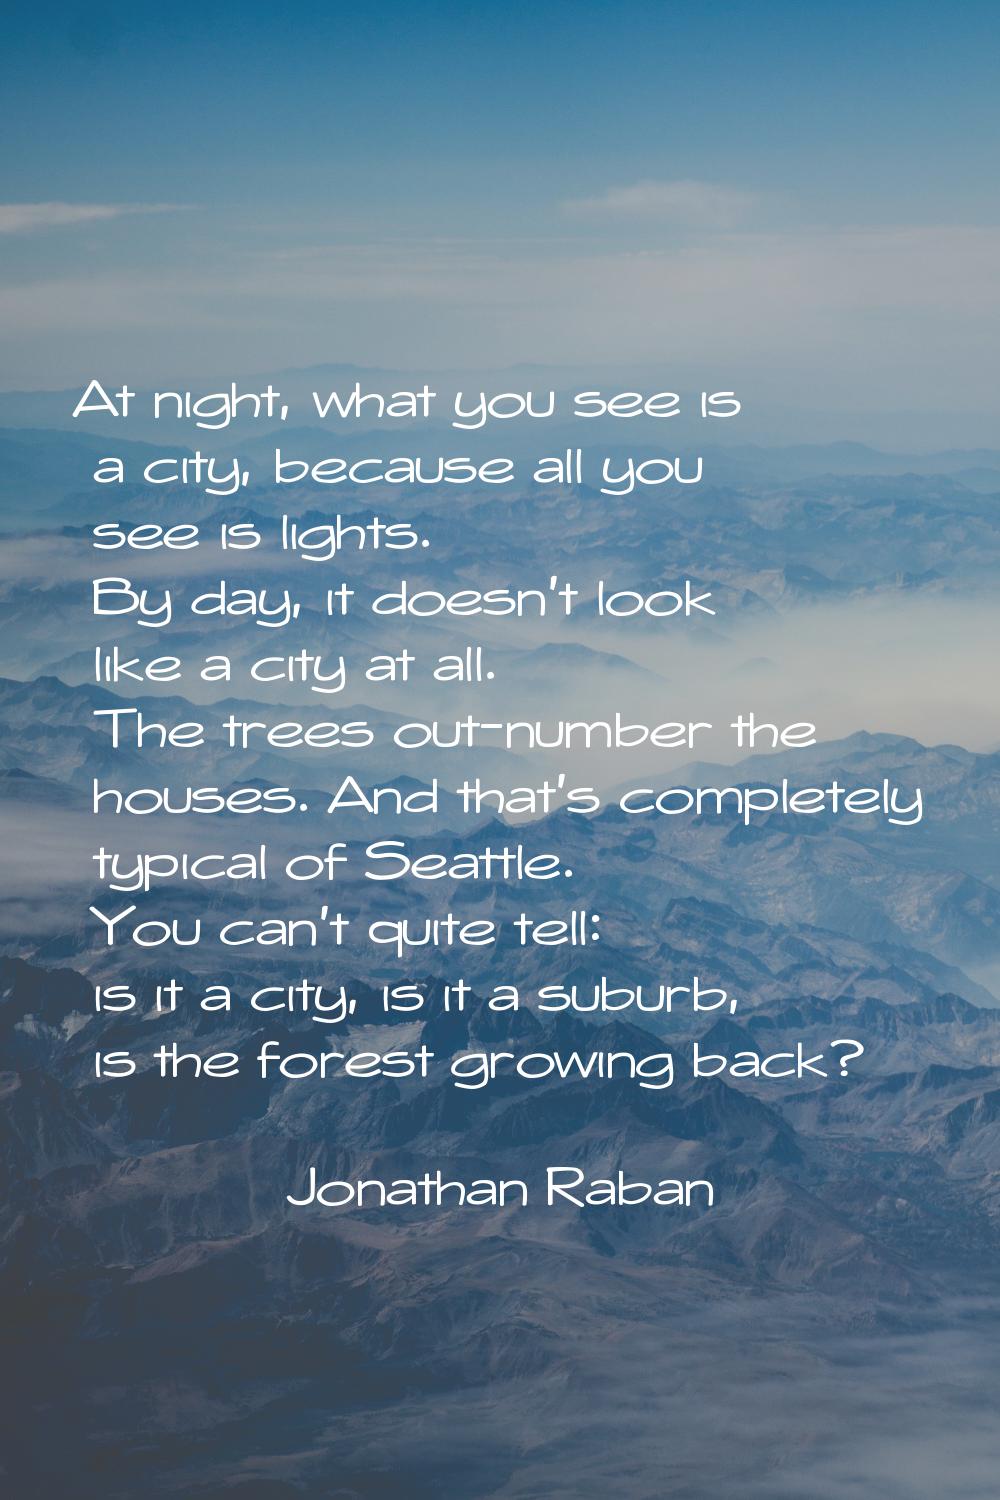 At night, what you see is a city, because all you see is lights. By day, it doesn't look like a cit